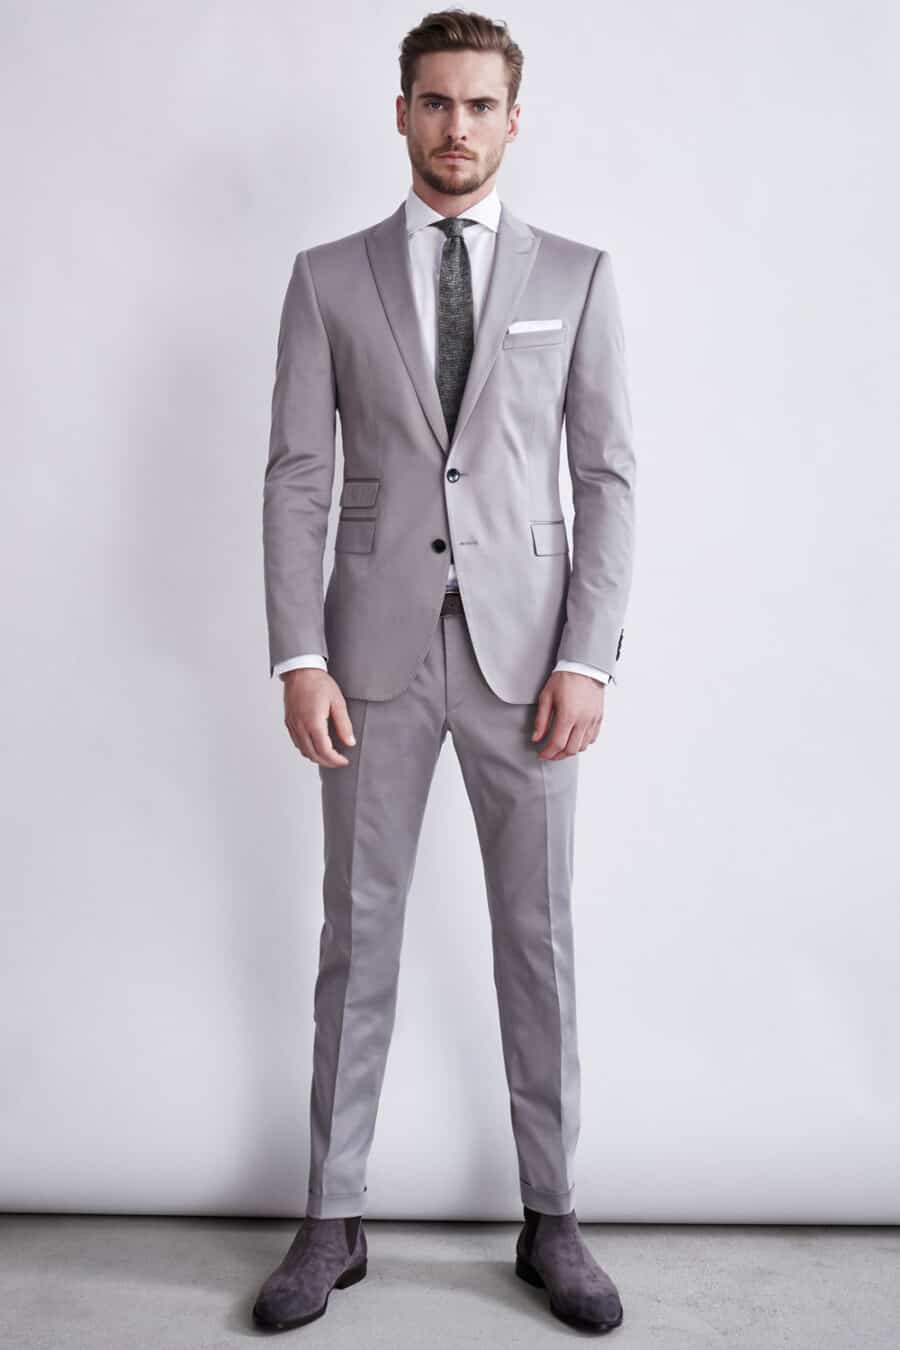 Men's light grey suit, white shirt, charcoal tie and grey suede Chelsea boots outfit